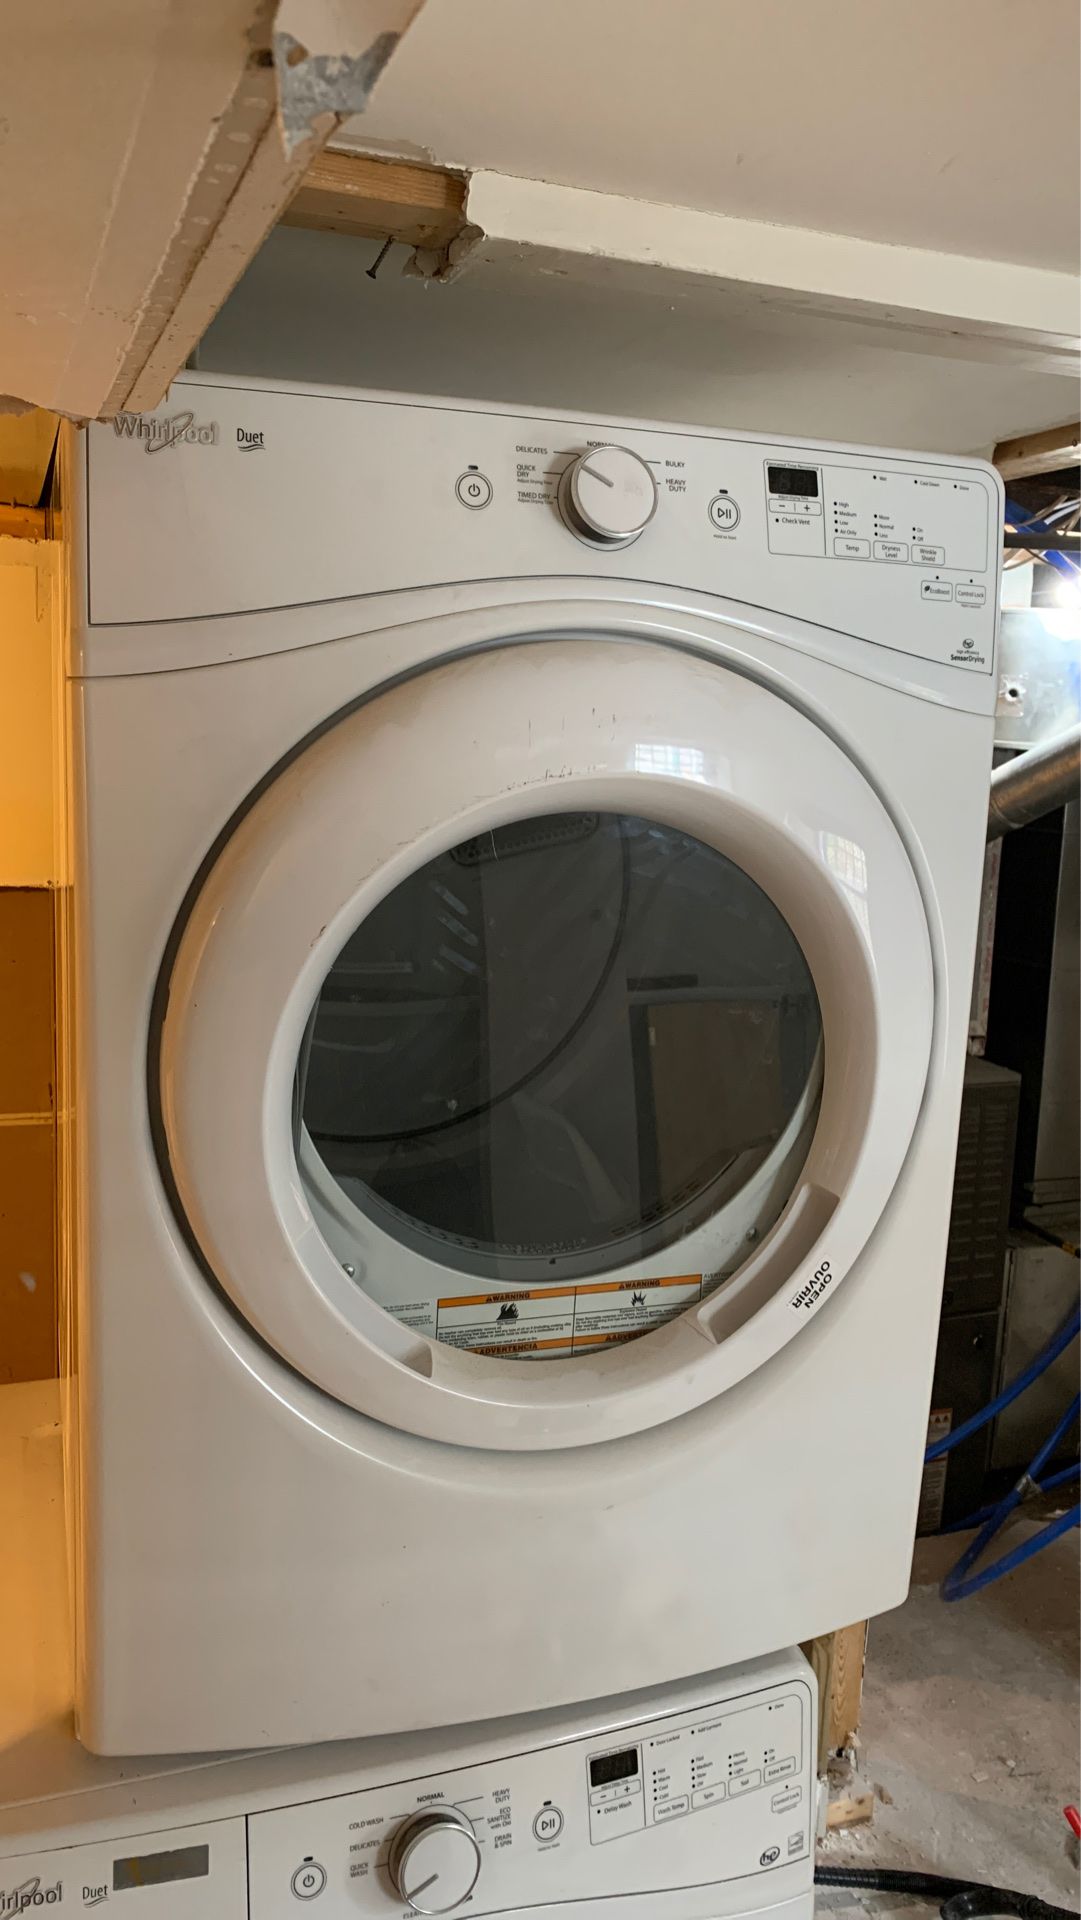 New barely used washer/dryer in great condition